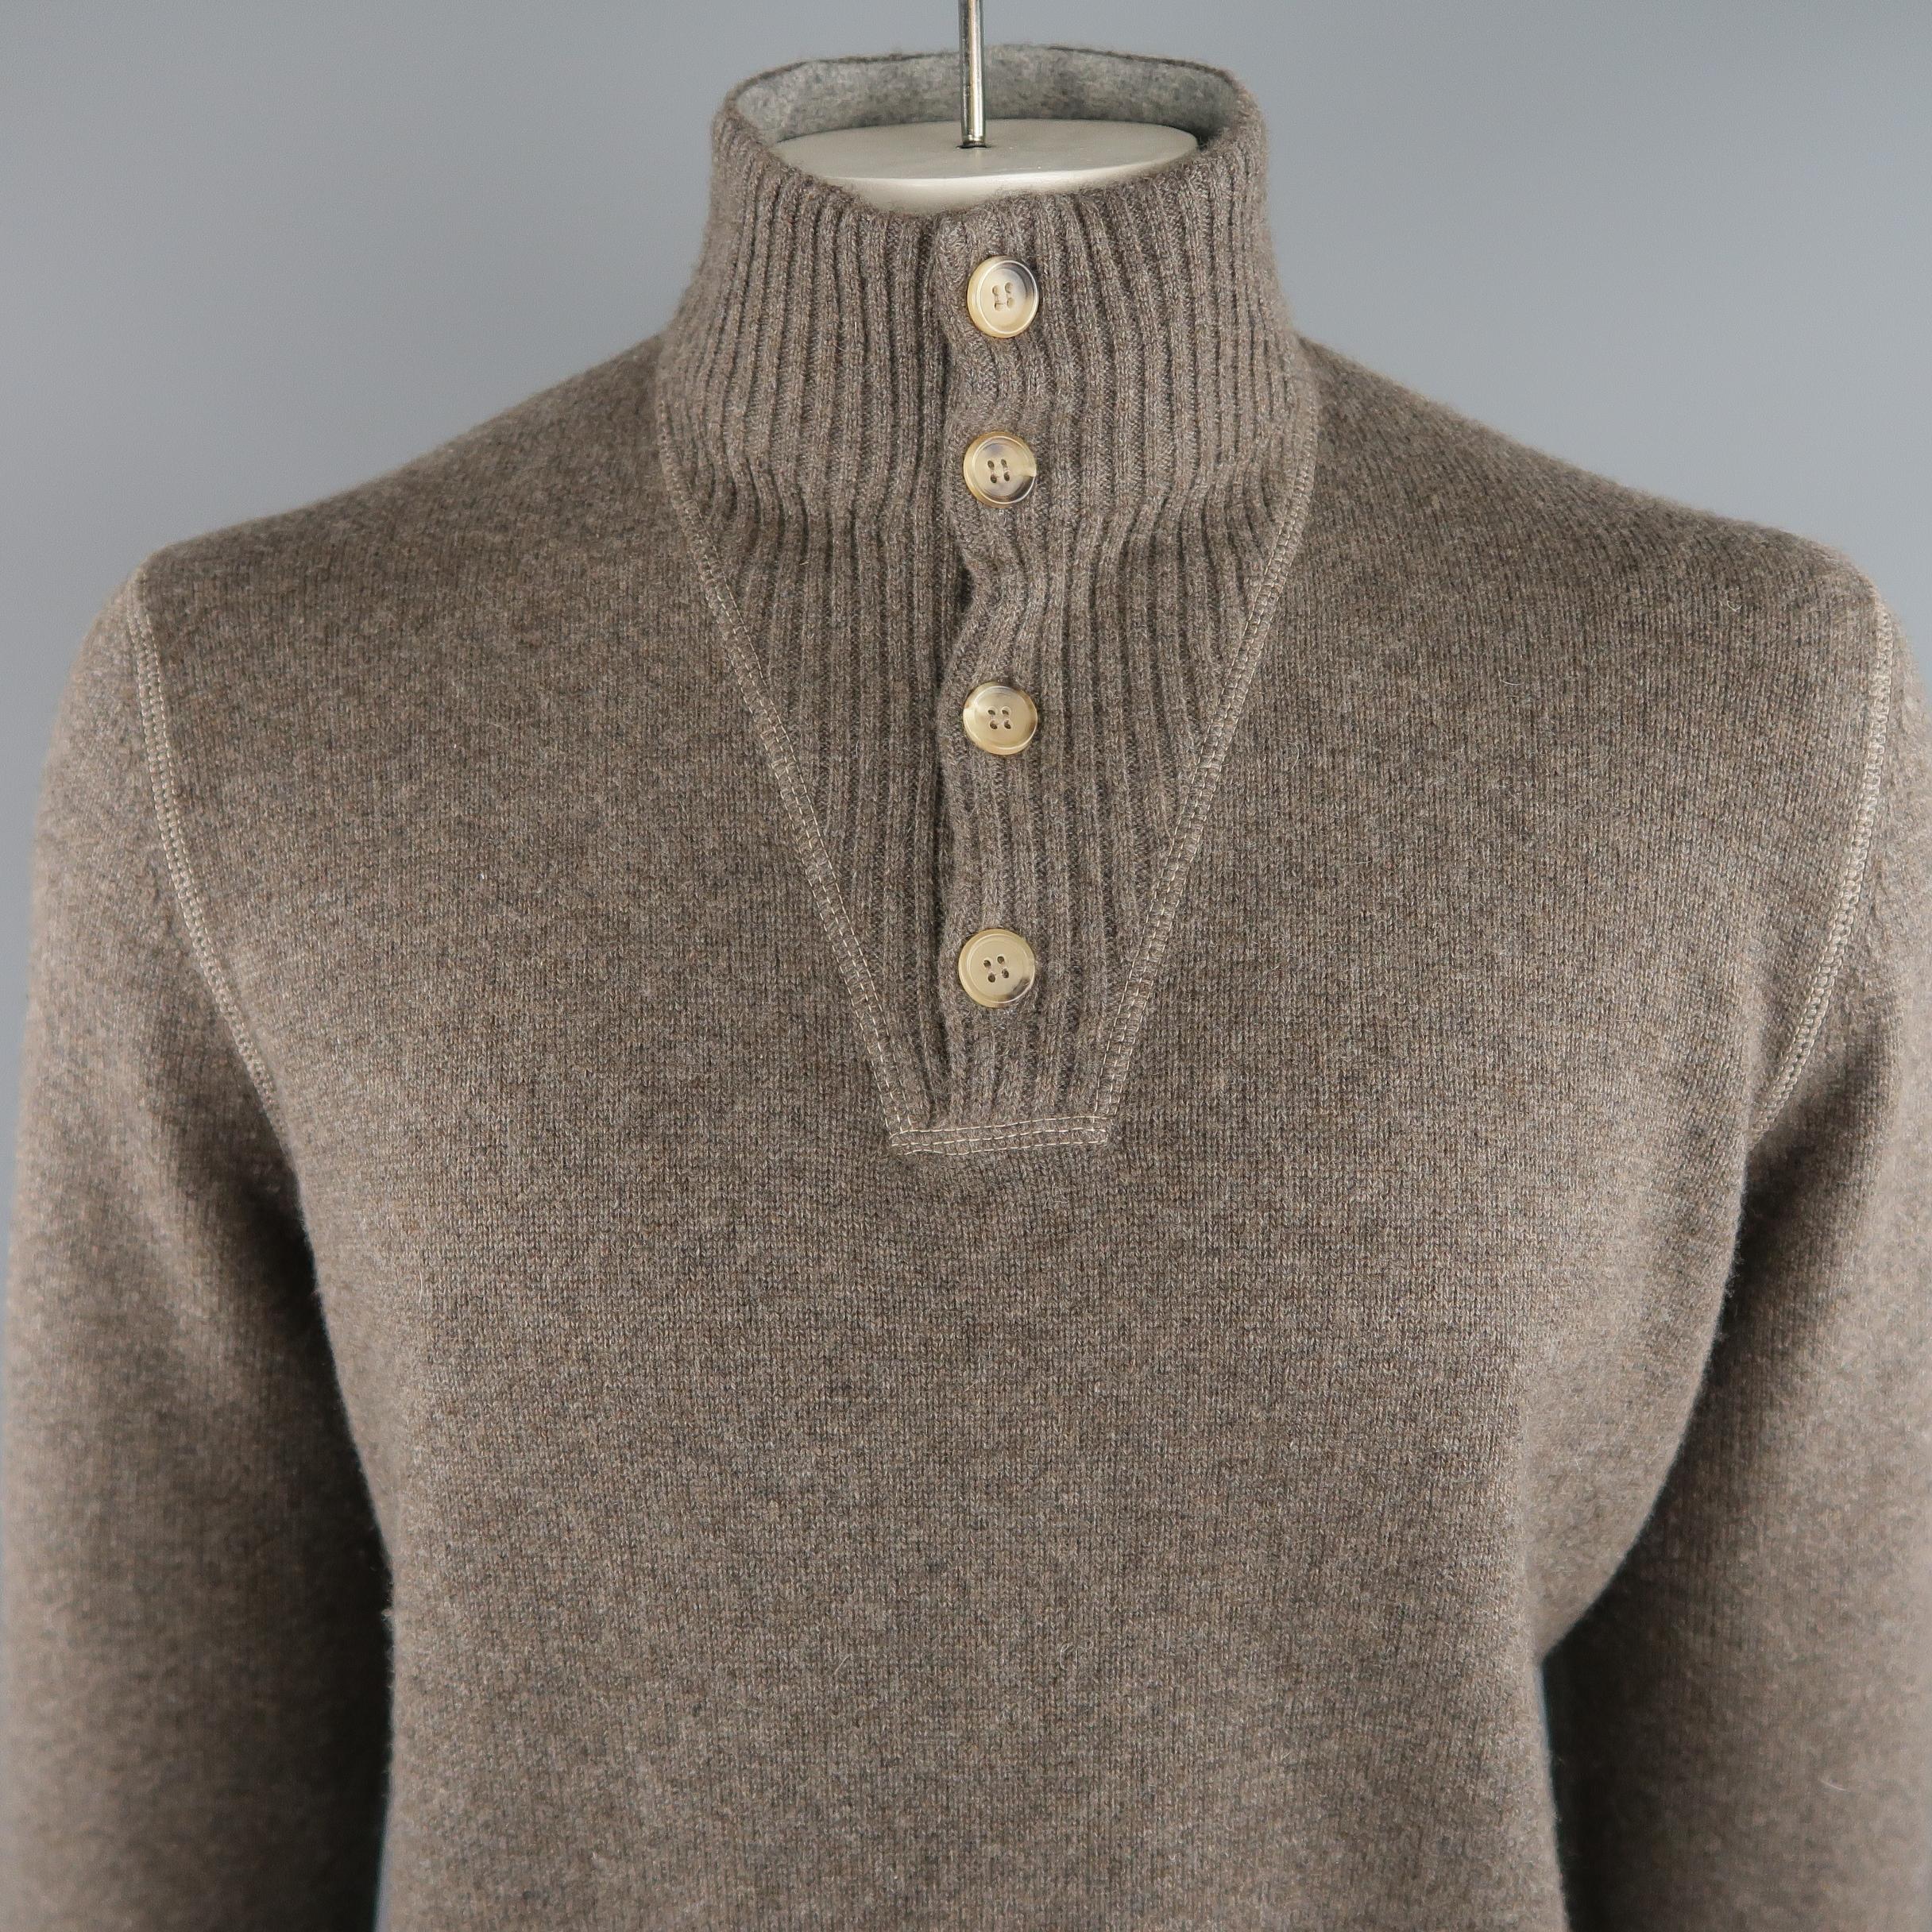 BRUNELLO CUCINELLI sweater come in taupe tone in knitted cashmere, buttoned high collar, ribbed cuffs and waistband. Made in Italy.
 
Excellent Pre-Owned Condition.
Marked: 54 IT
 
Measurements:
 
Shoulder: 18 in.
Chest: 49 in.
Sleeve: 26.5 